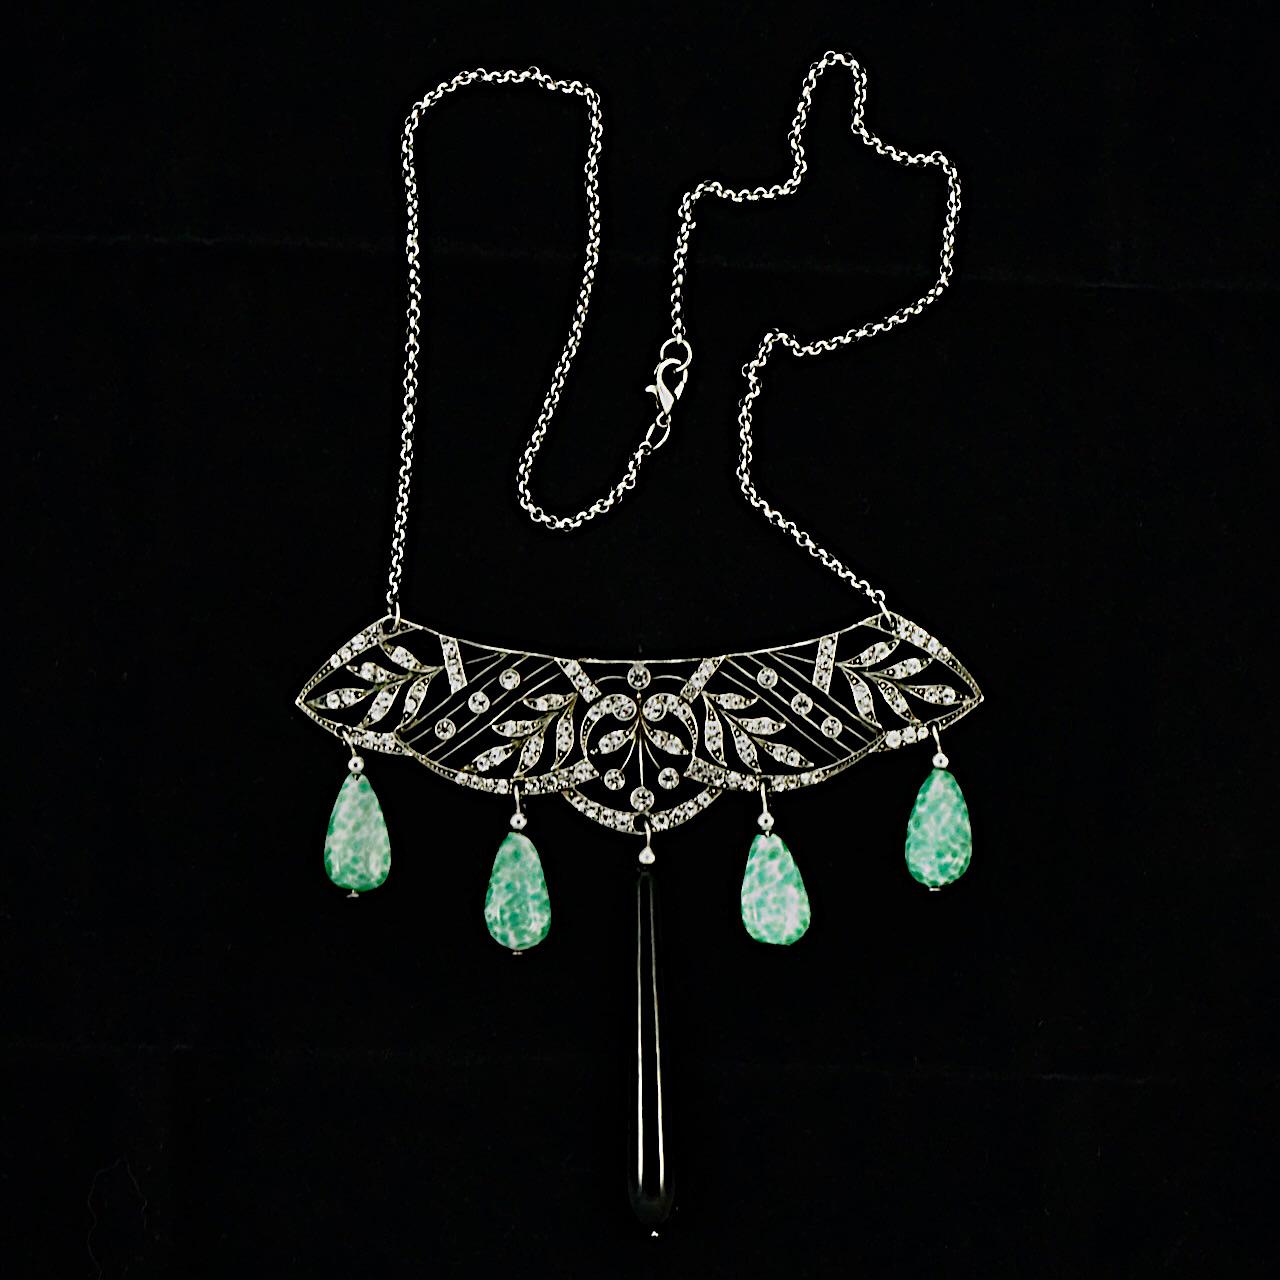 Reworked Tiara Crystal Necklace with Peking Black Glass Drops circa 1930s  For Sale 4